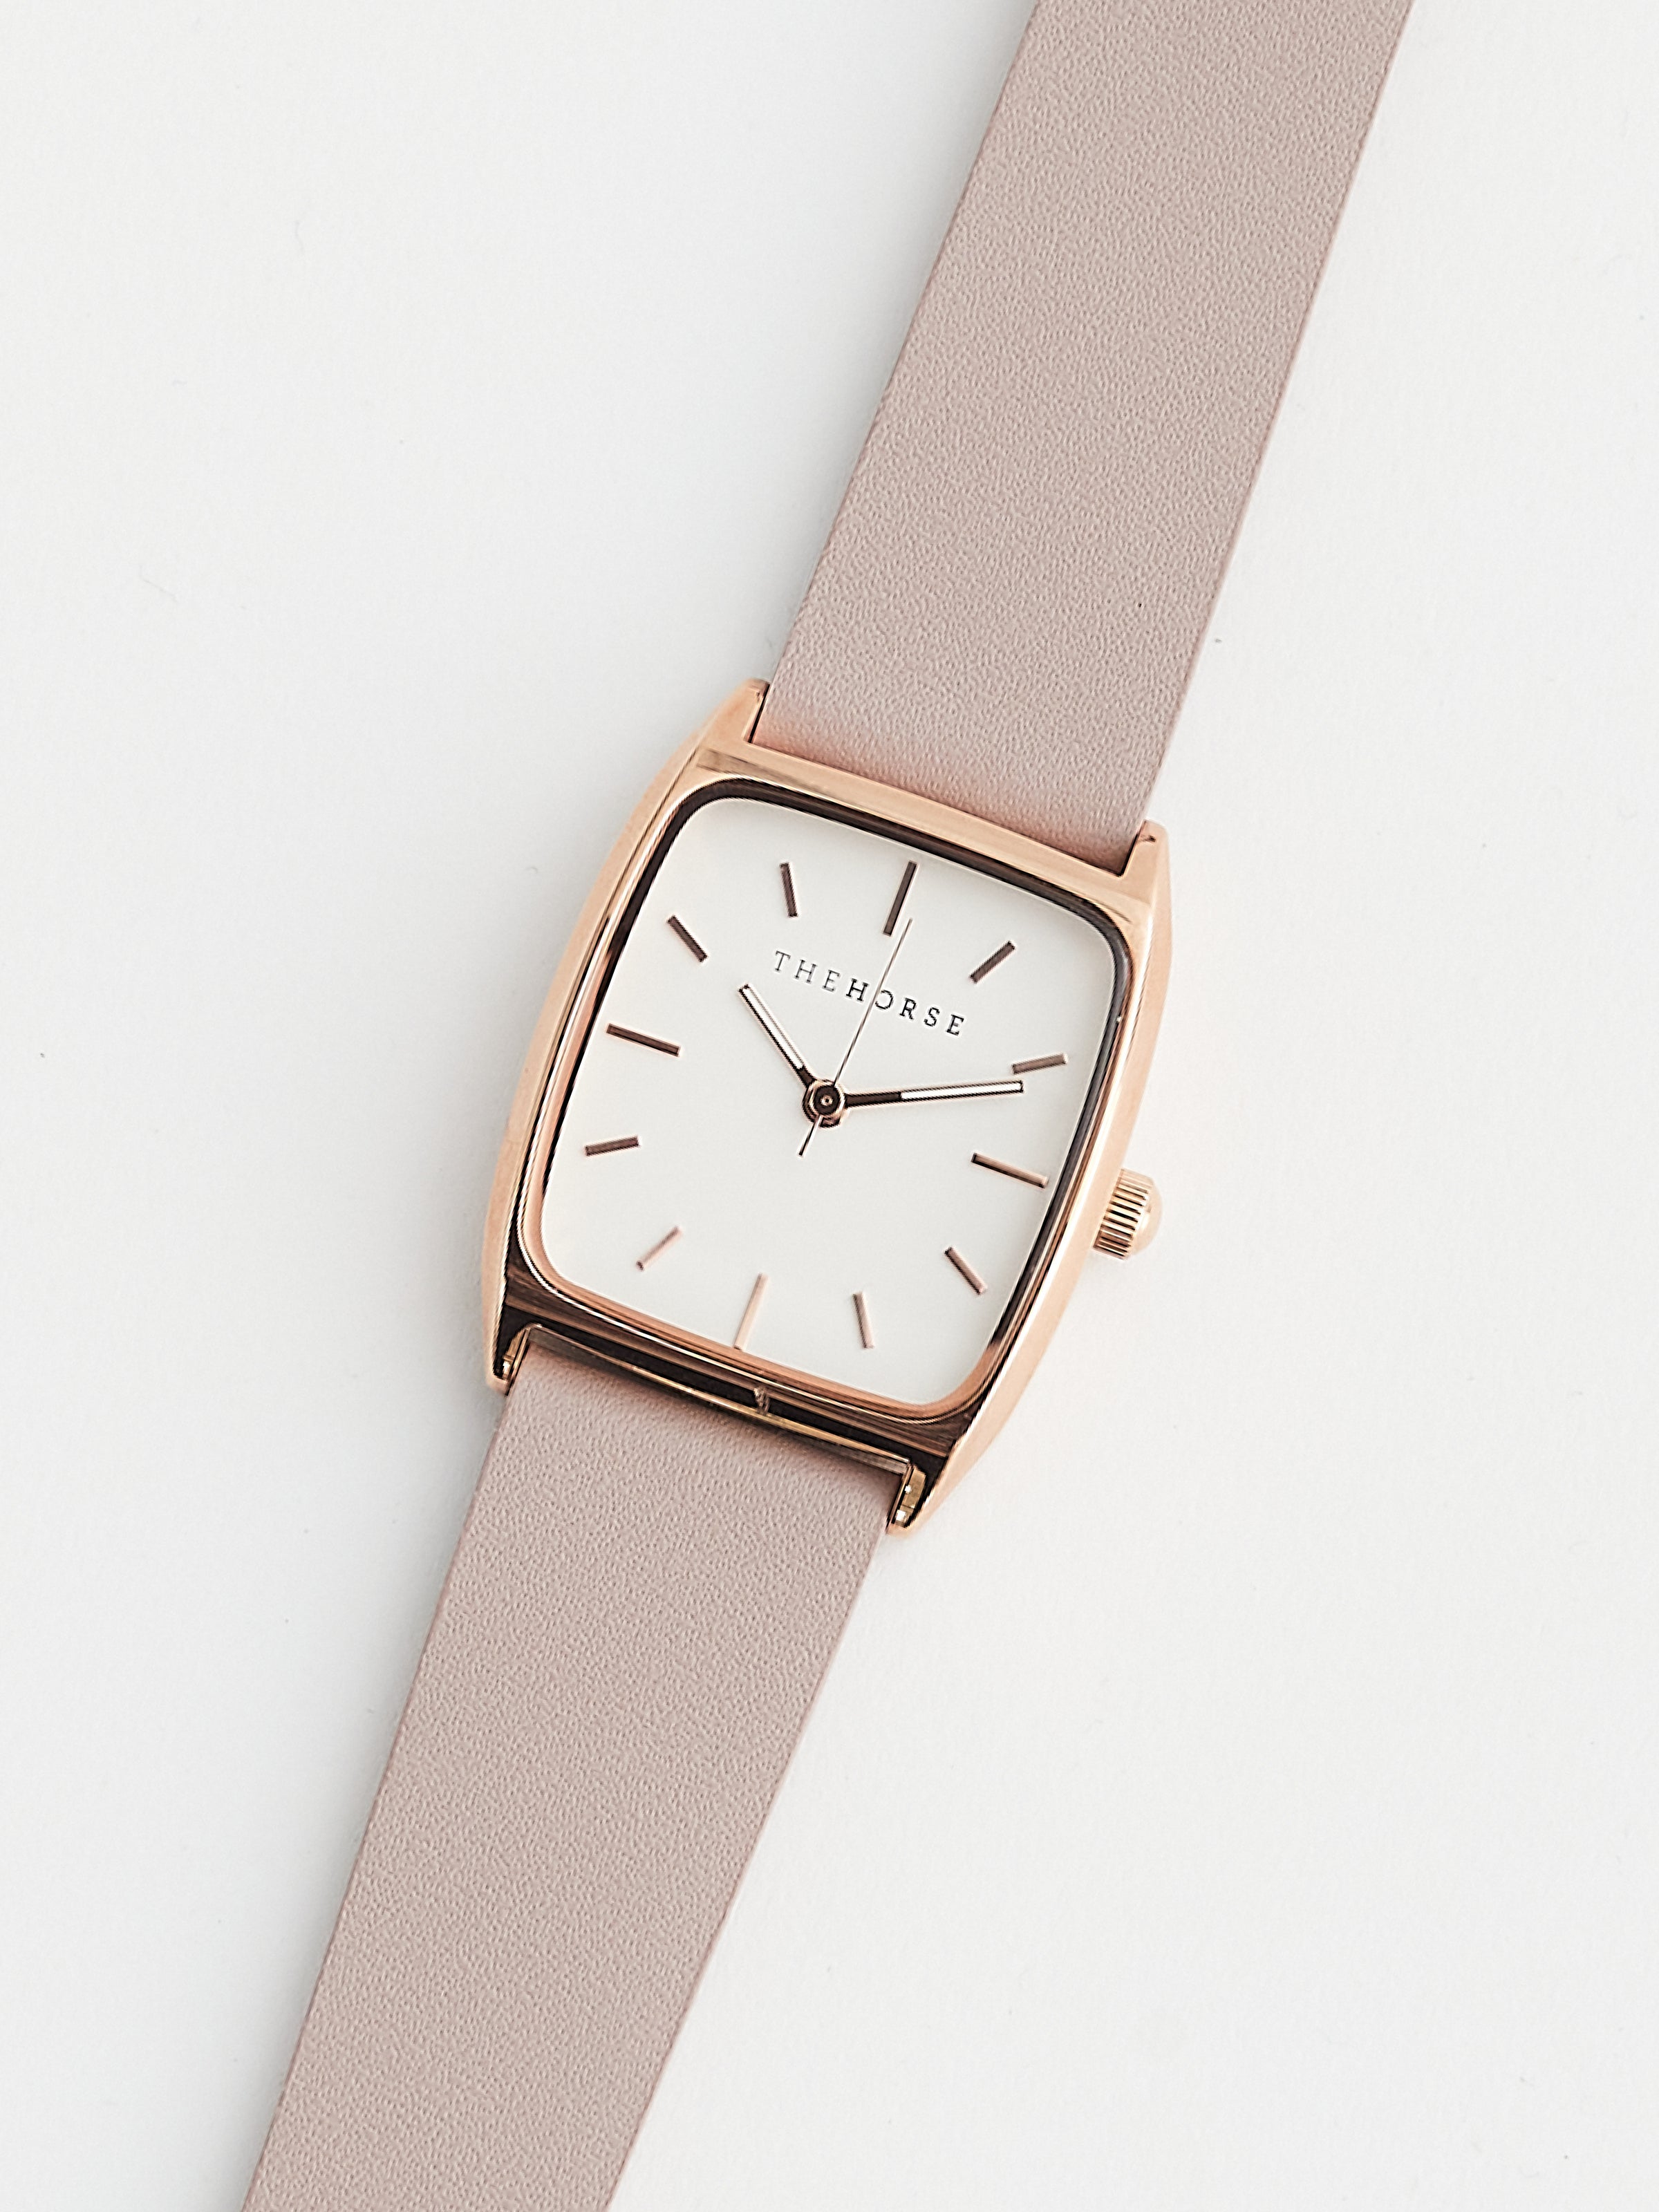 The Dress Watch: Rose Gold / White Dial / Blush Leather